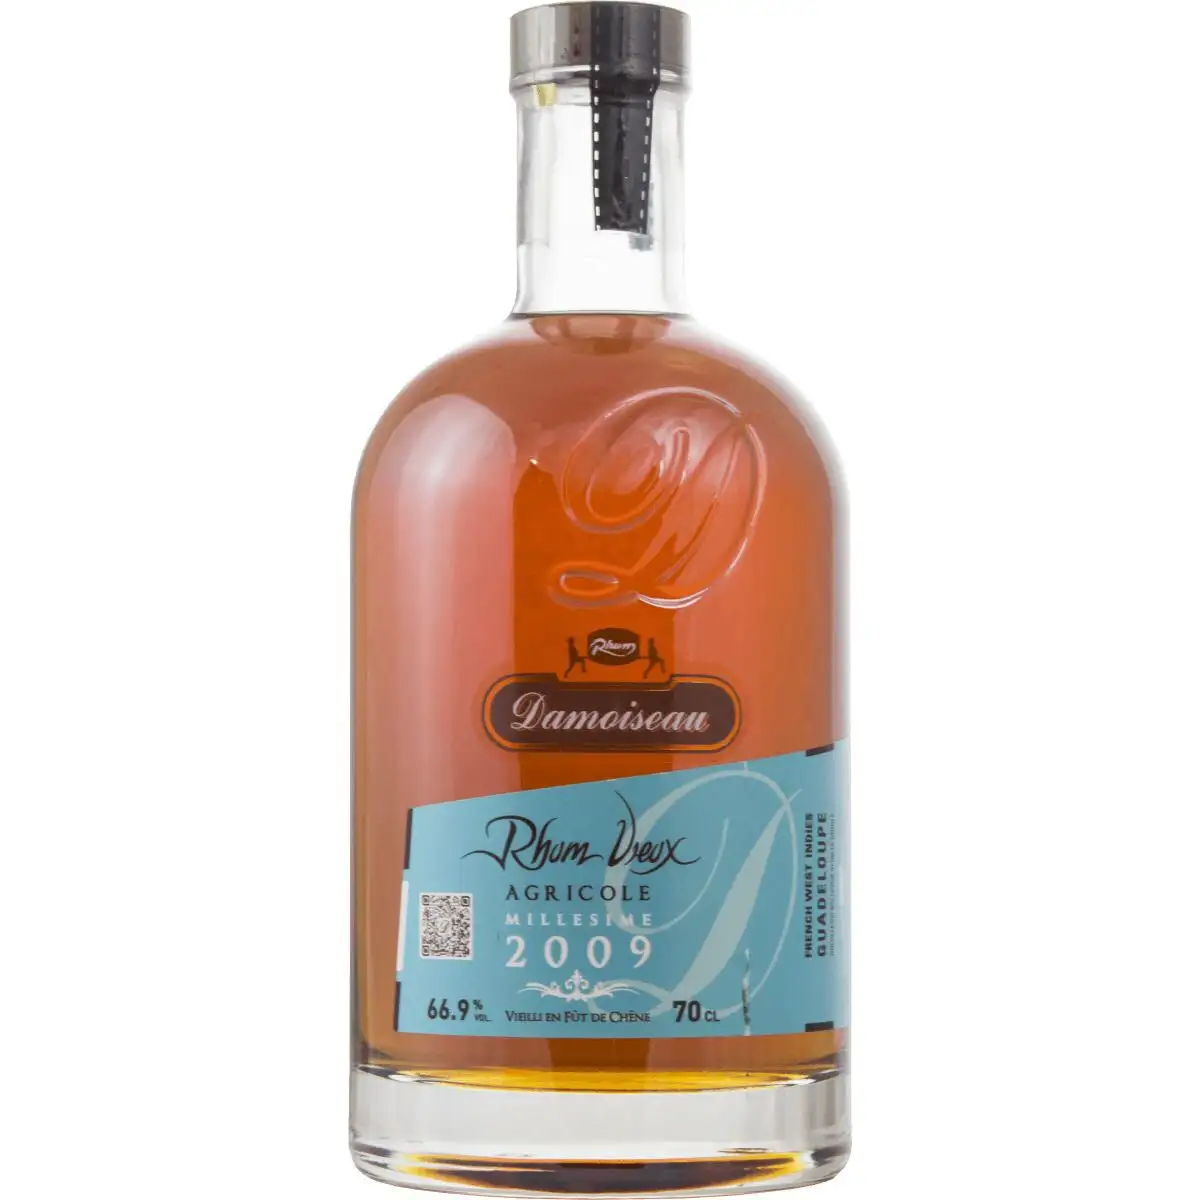 Image of the front of the bottle of the rum 2009